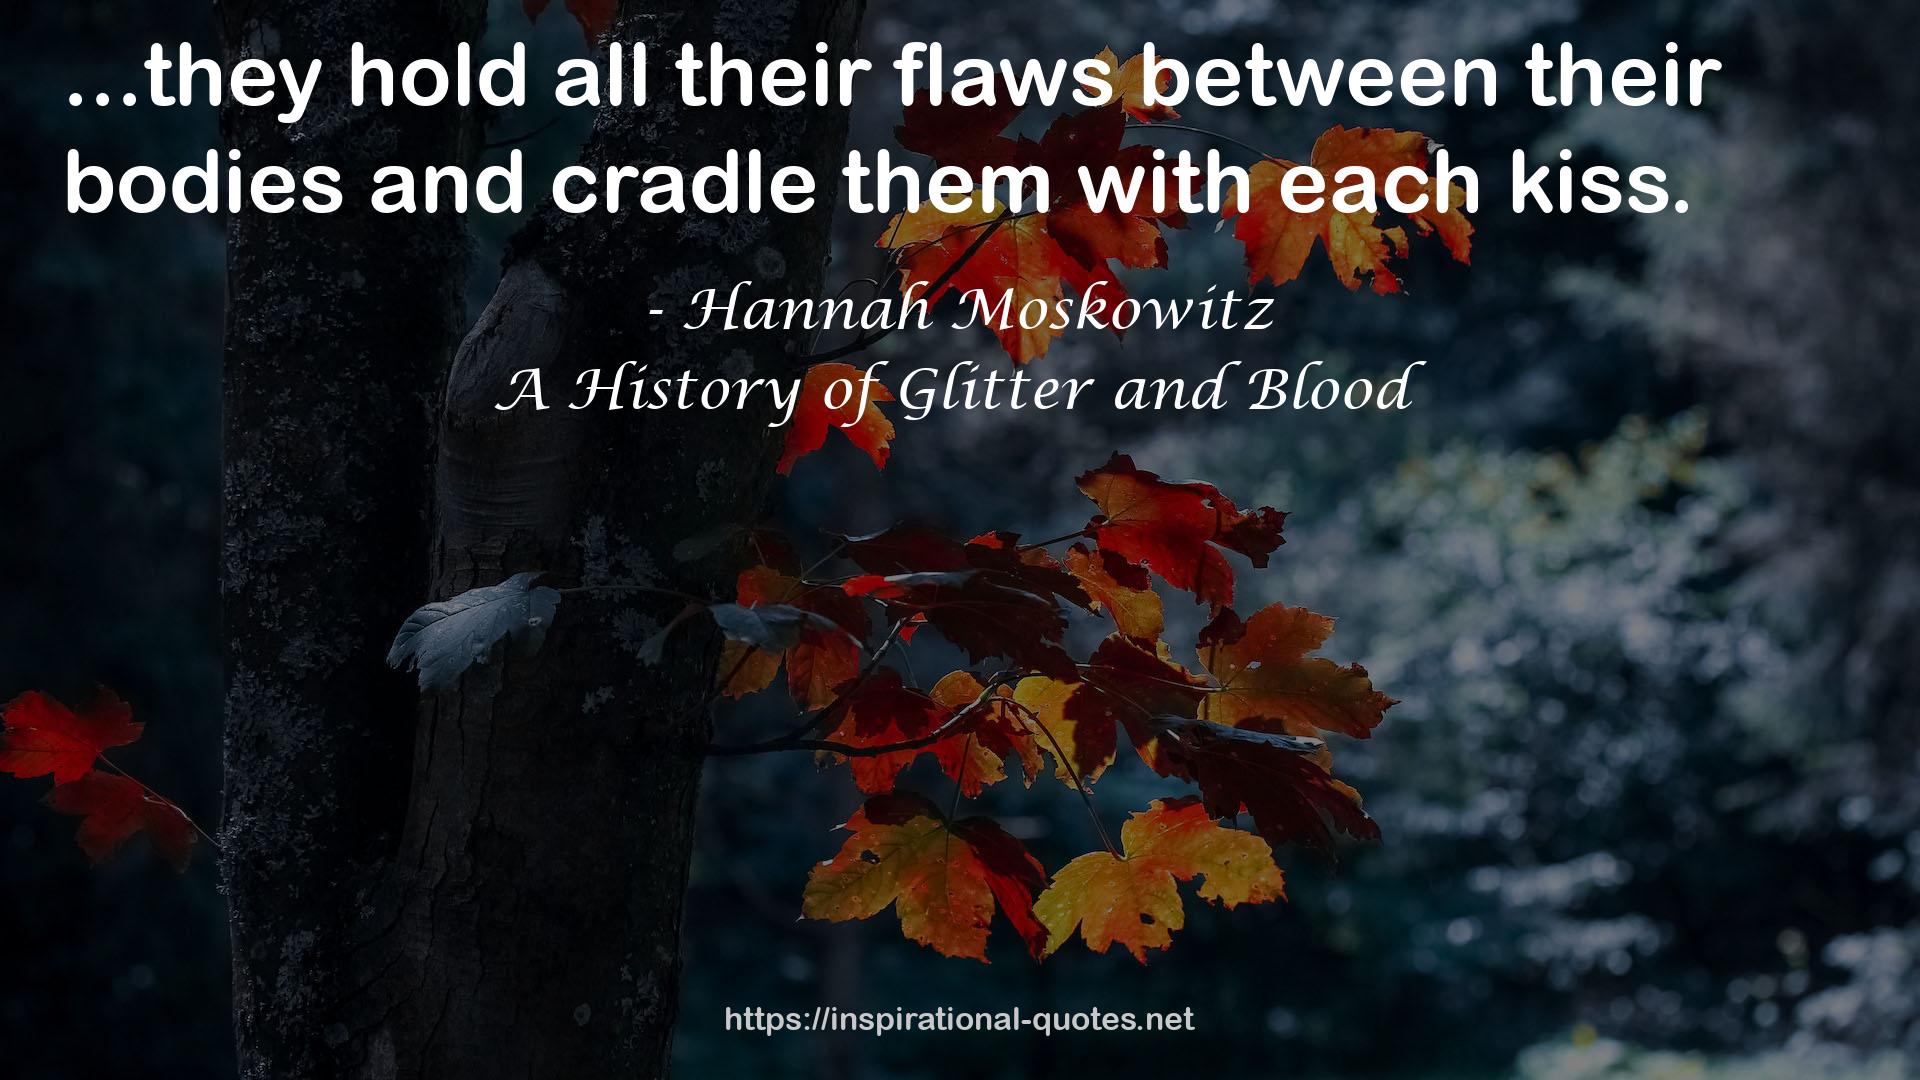 A History of Glitter and Blood QUOTES